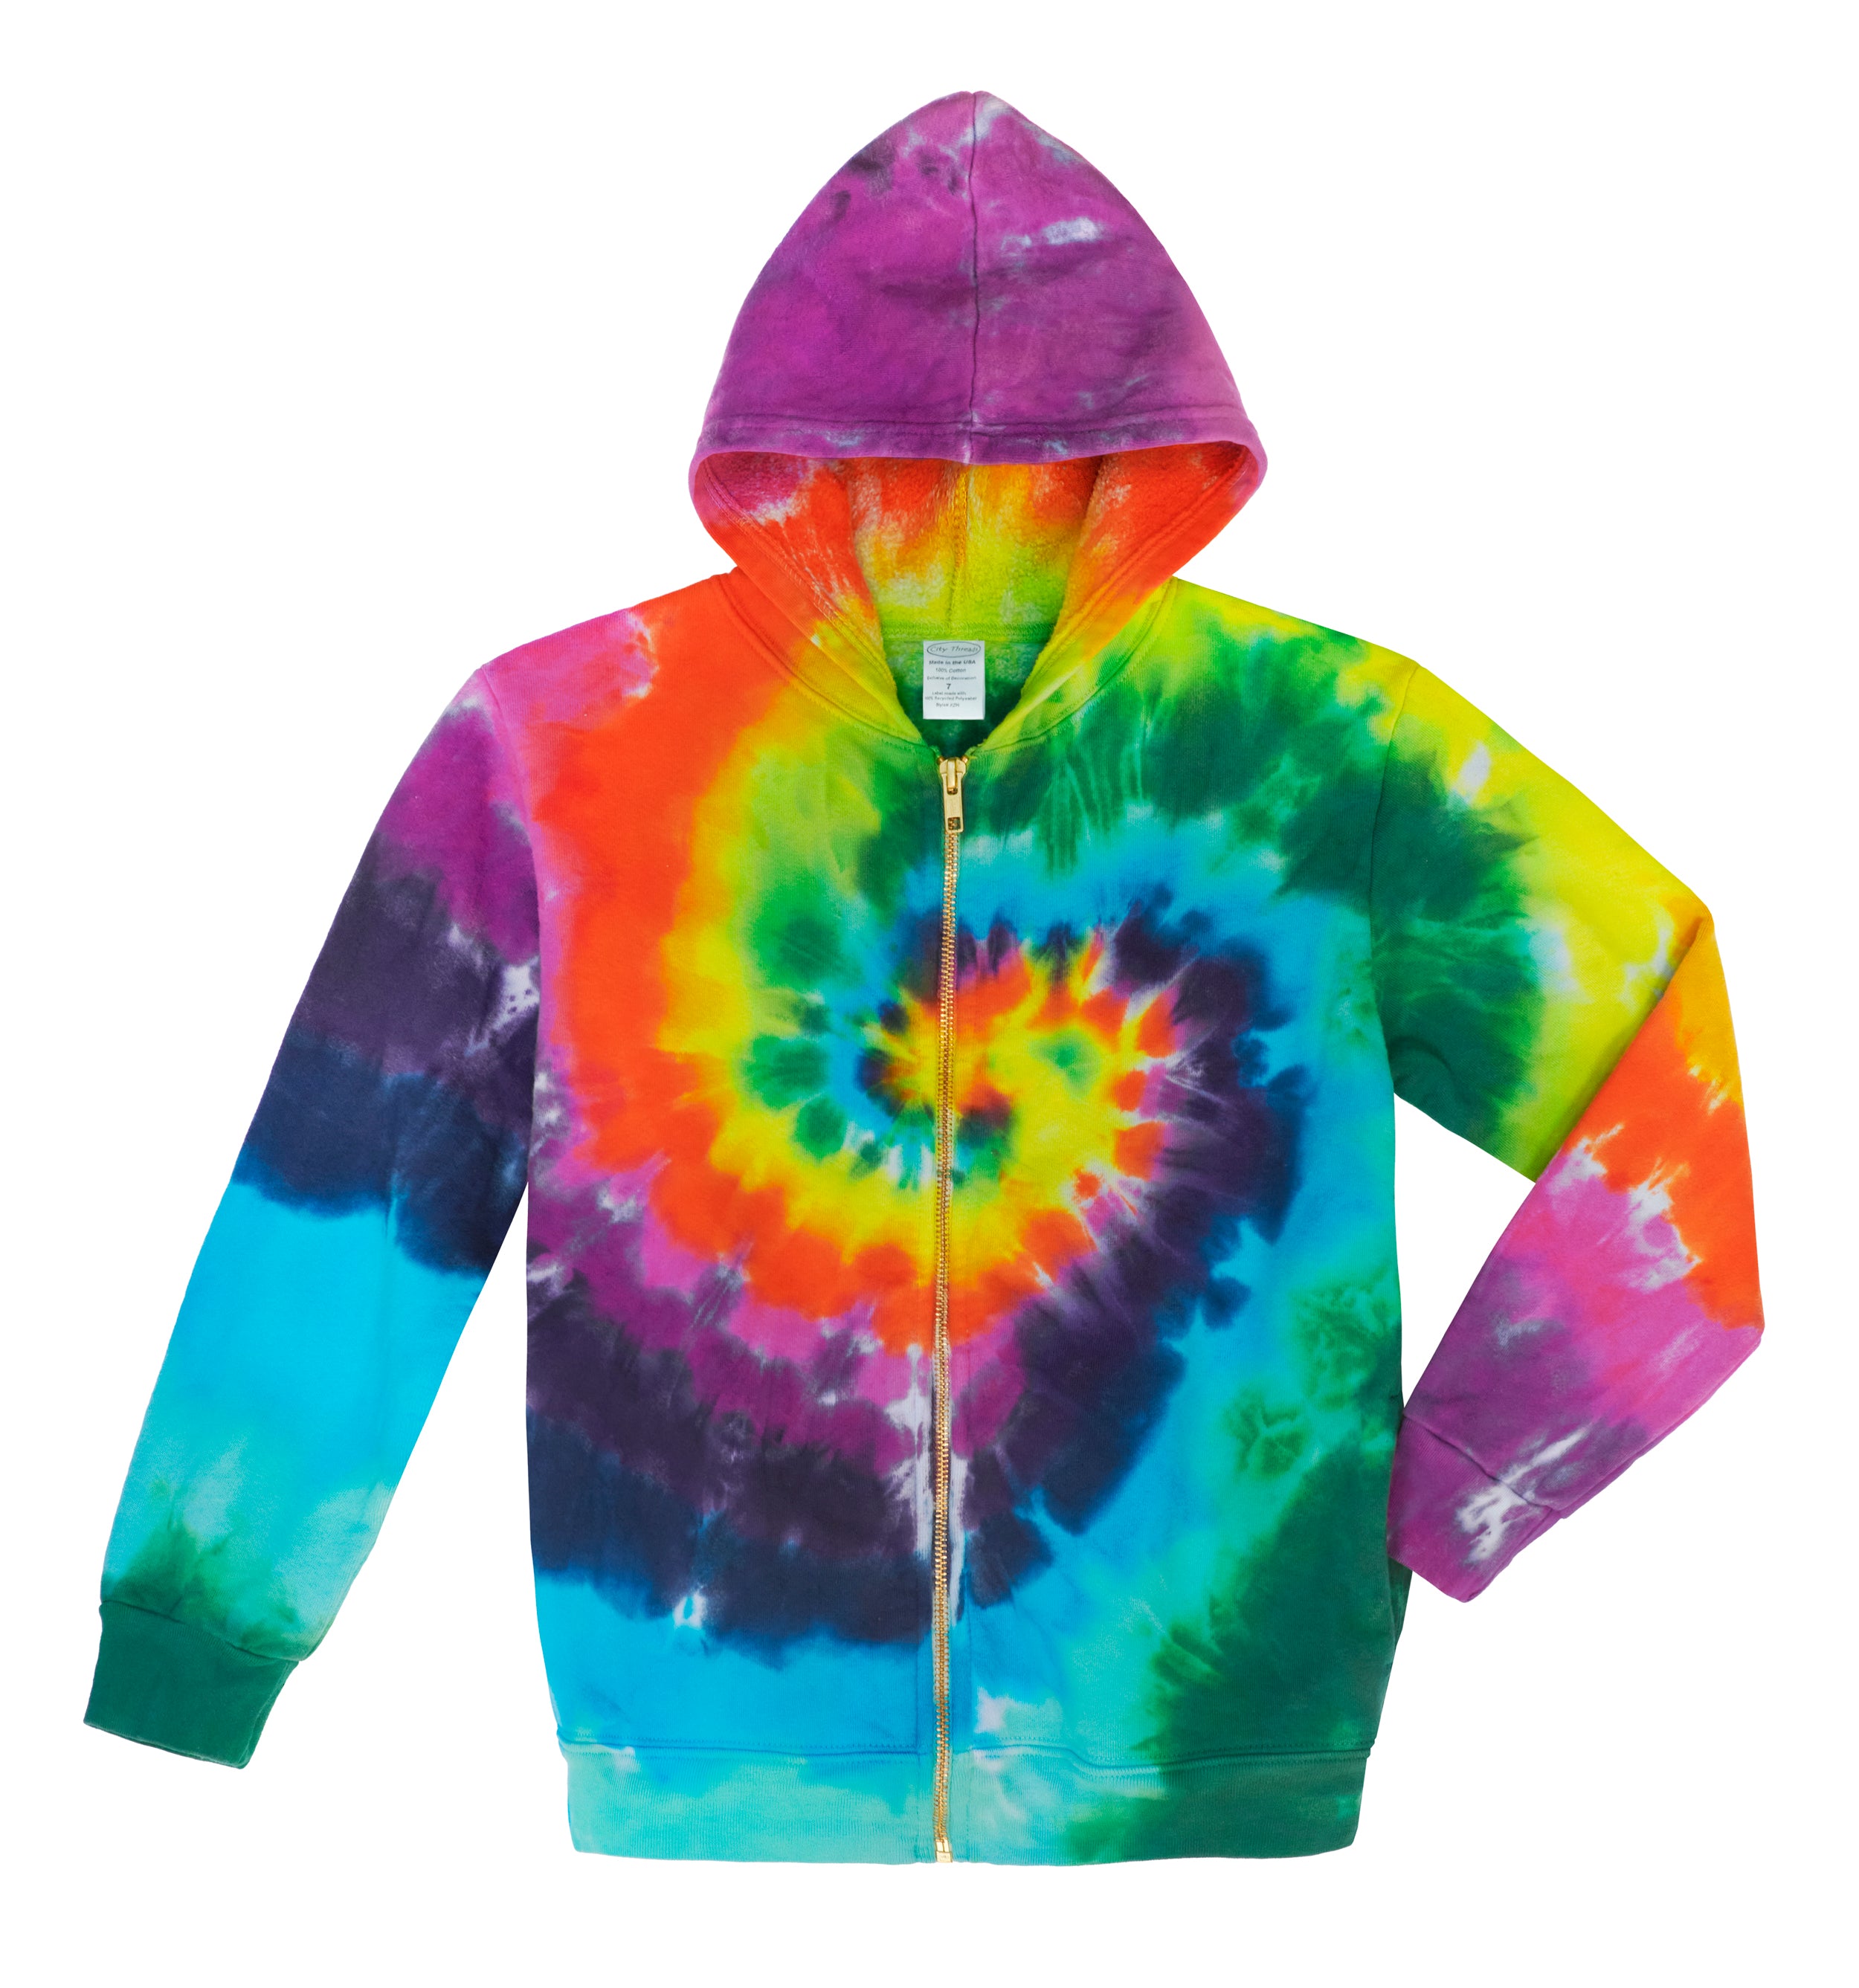 Limited Edition Tie Dyed Soft & Cozy 100% Cotton Fleece Zip Hoodie